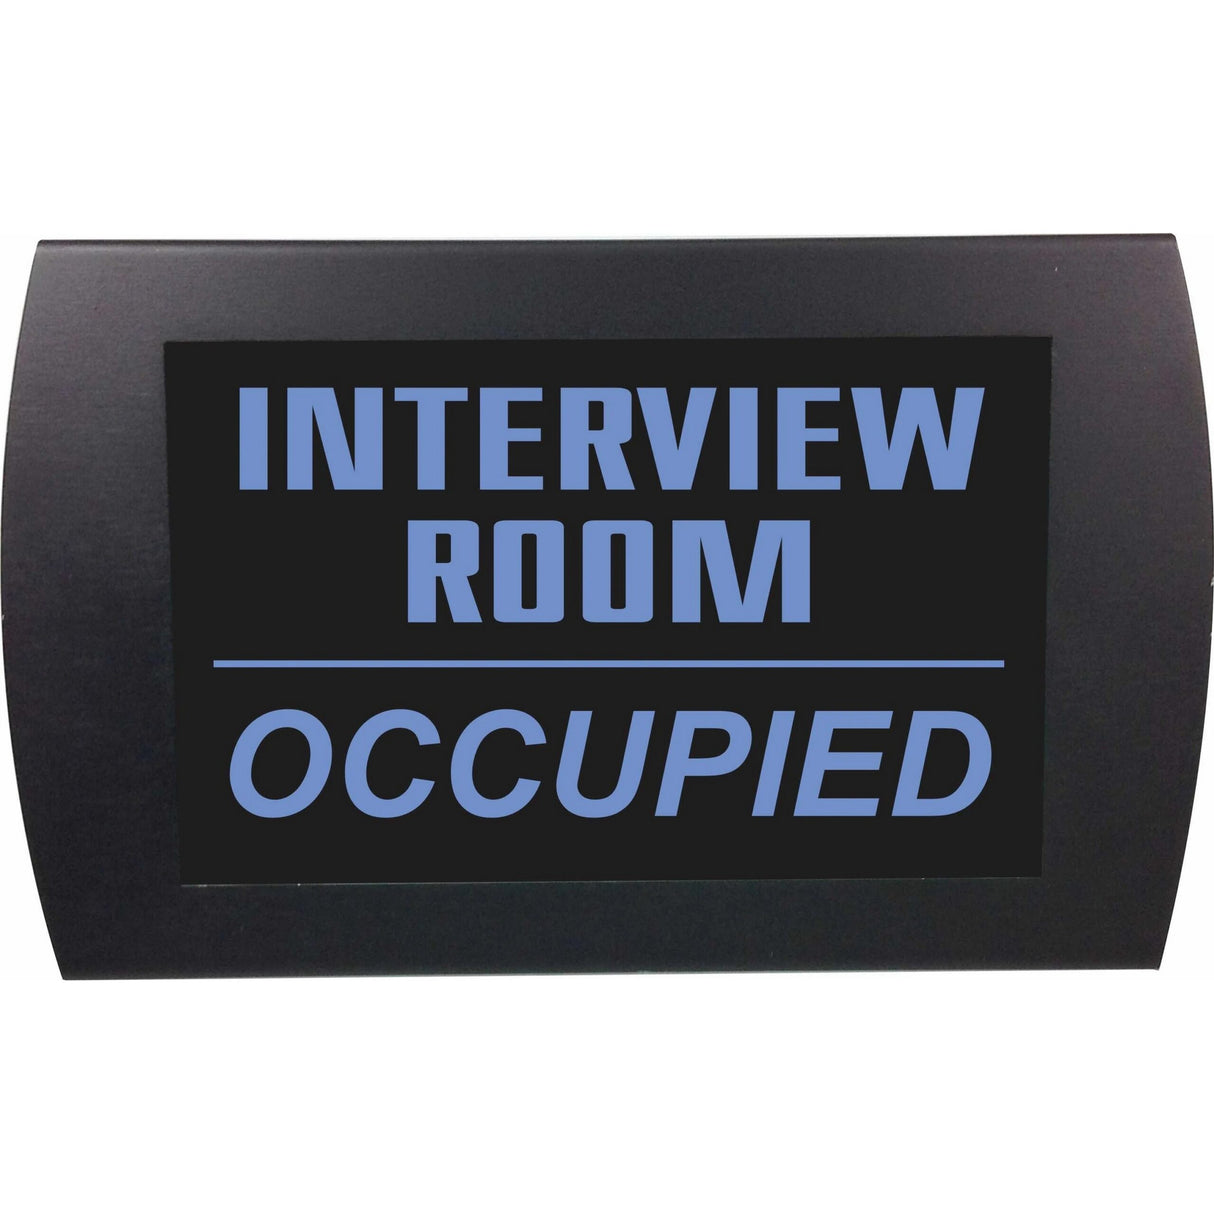 American Recorder Technologies OAS-2055M "INTERVIEW ROOM OCCUPIED" LED Lighted Sign, Blue